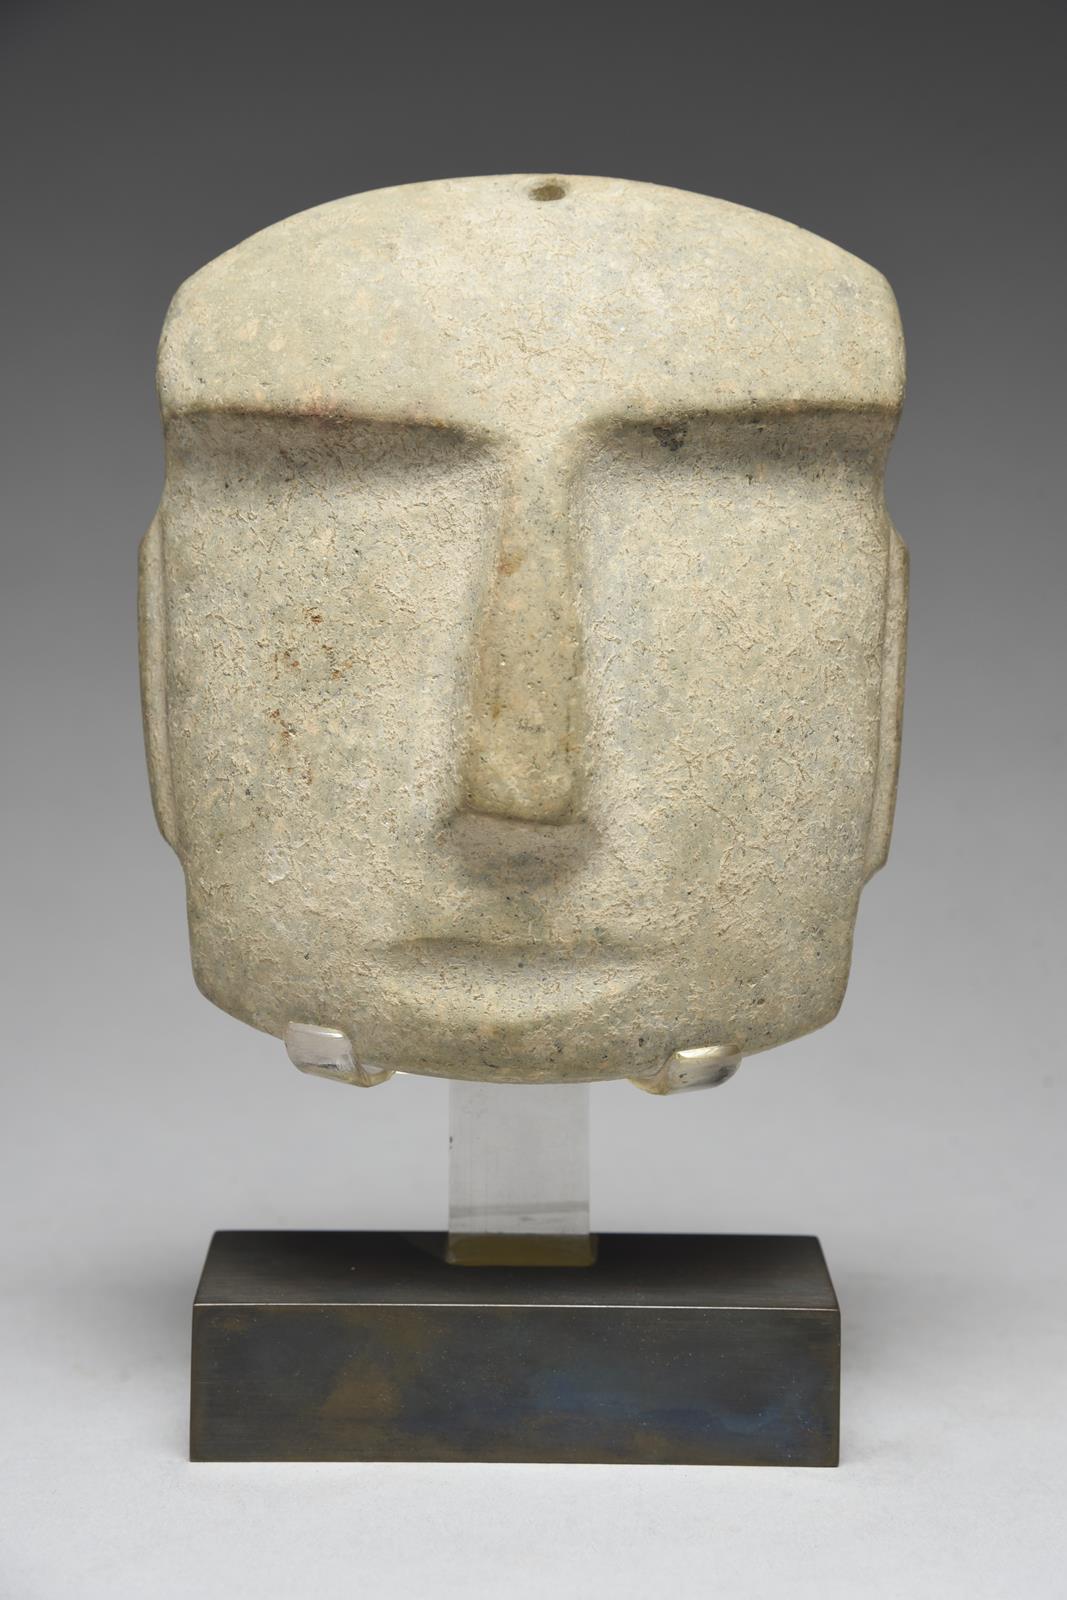 A Mezcala mask Mexico, circa 400 BC - 100 AD grey/green stone, with an overhanging brow and and